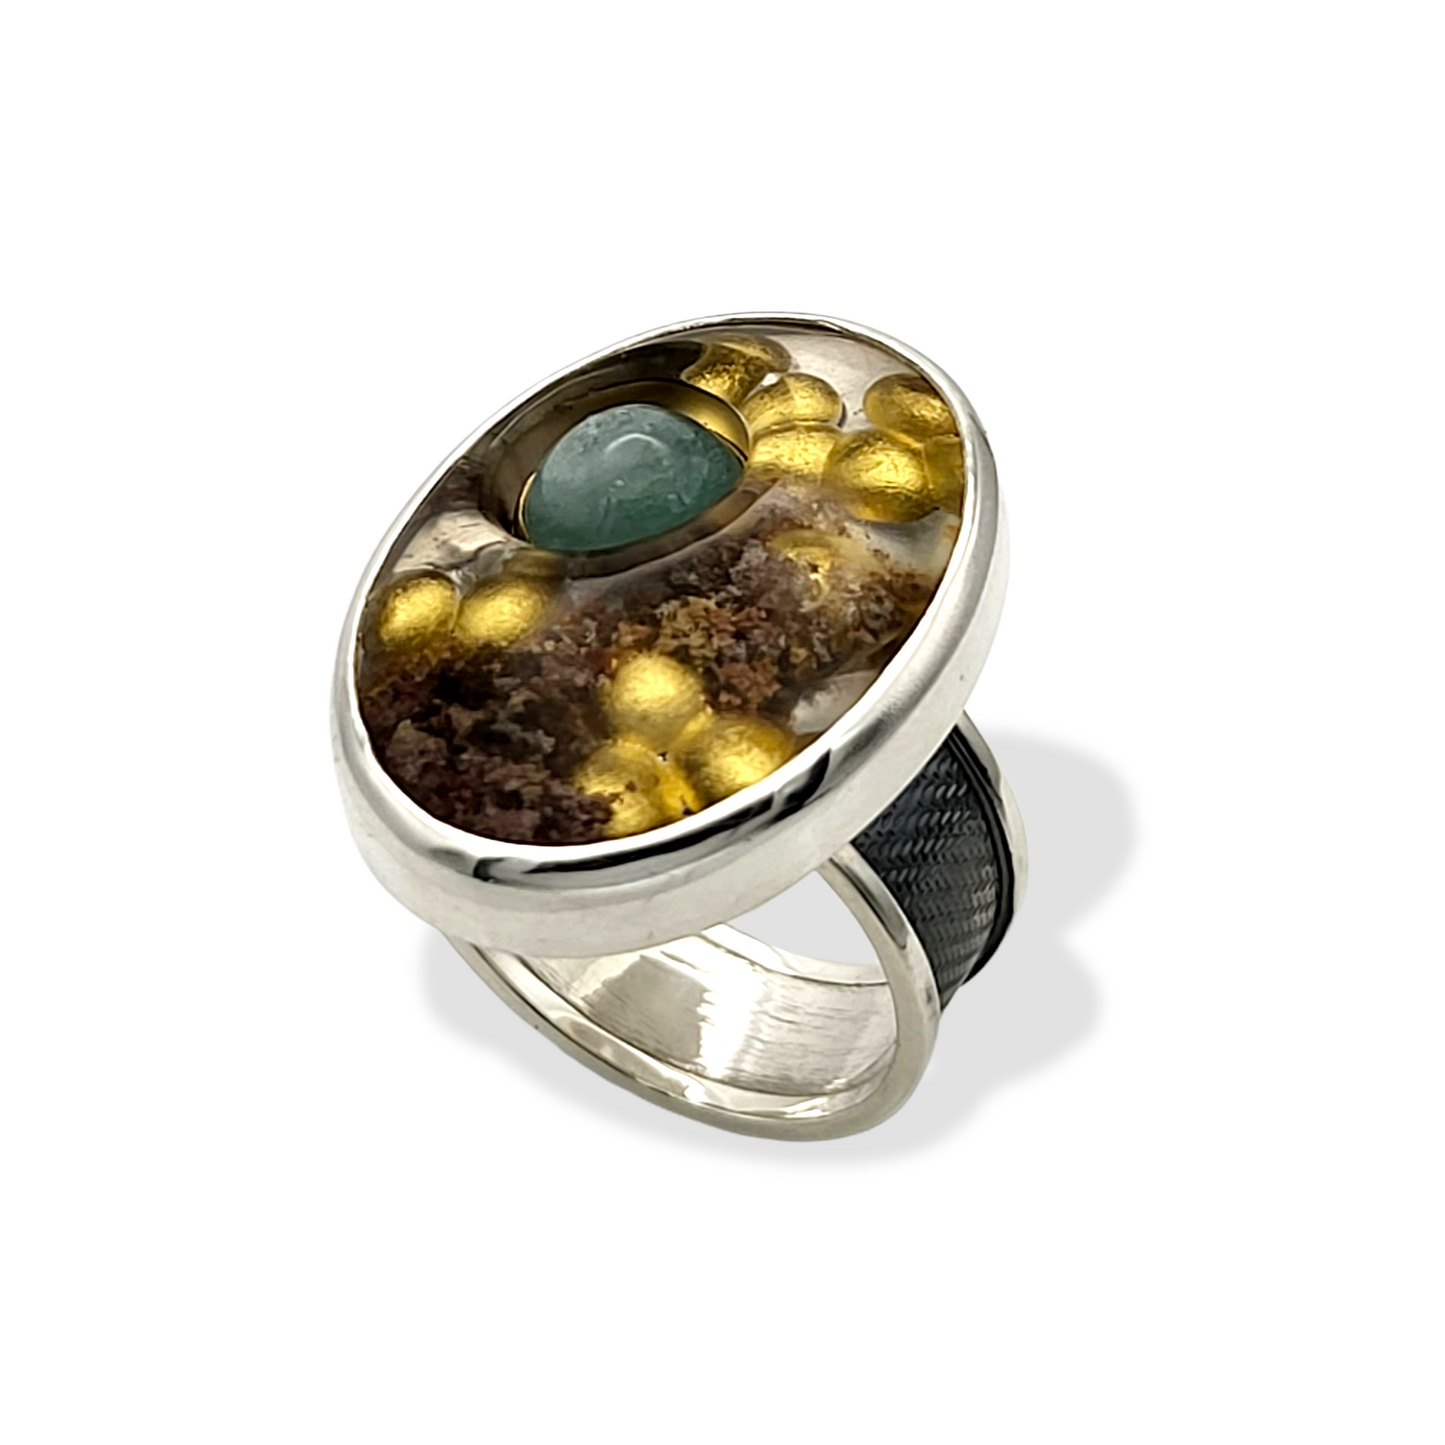 Oxidized Sterling Silver Ring with Lodalite Quartz, Blue Tourmaline and Gold Leaf